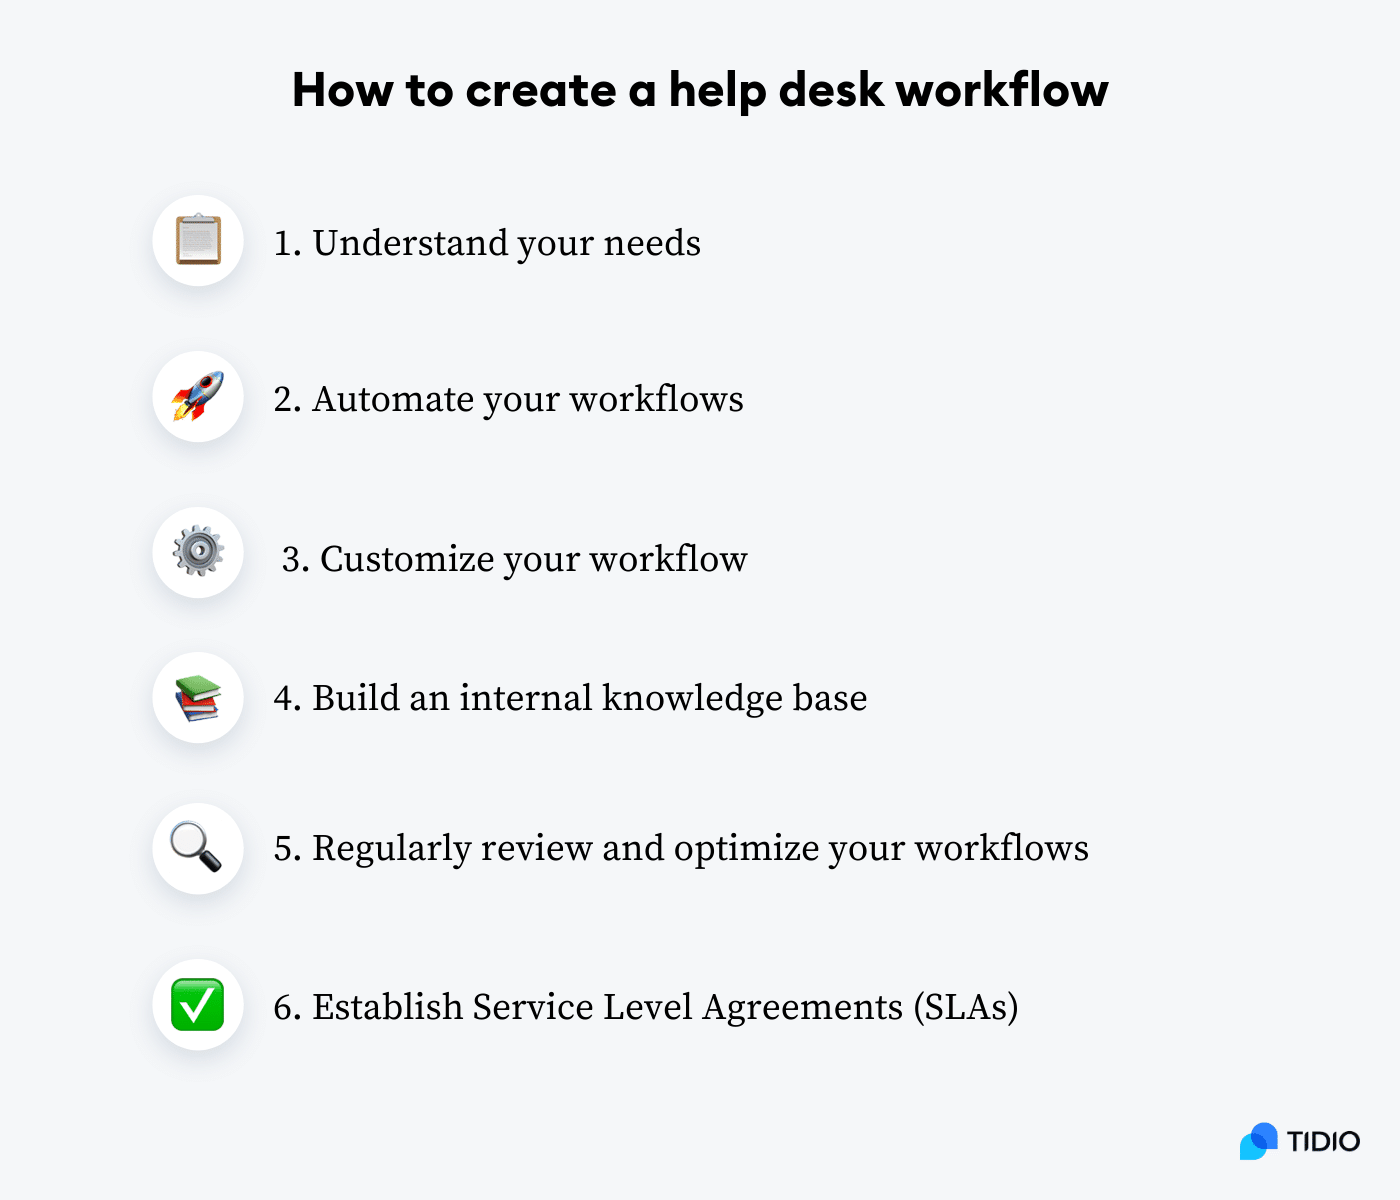 How to create and optimize a help desk workflow